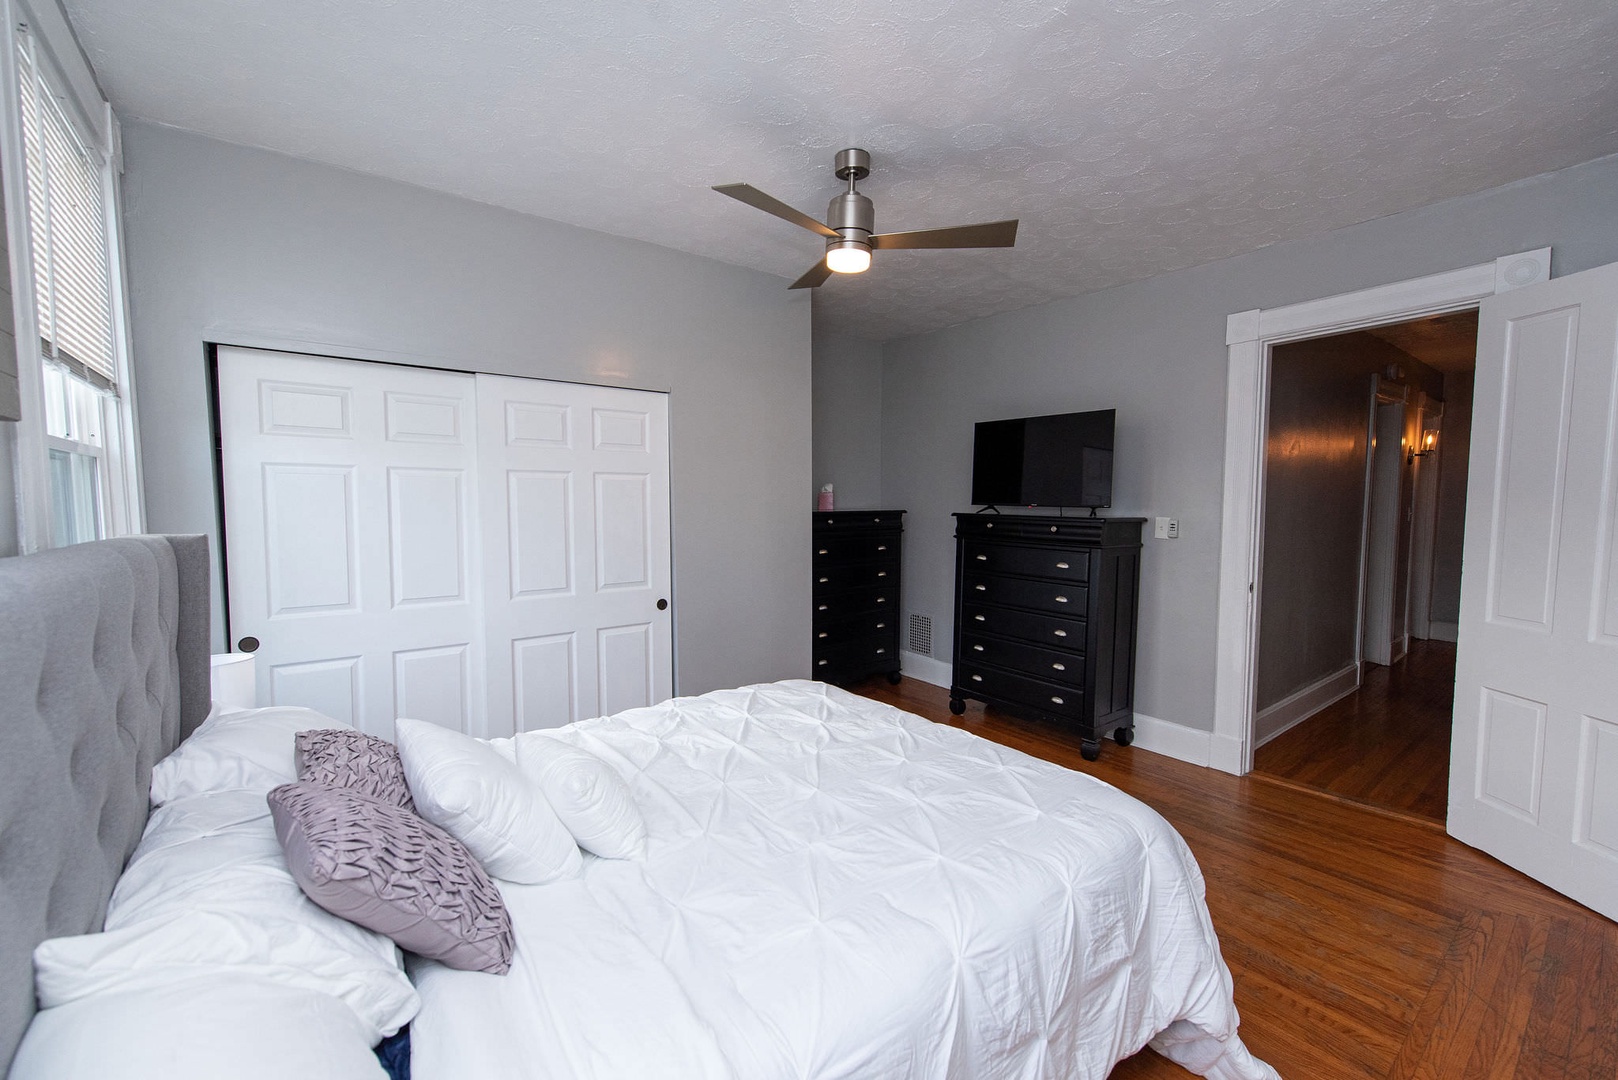 The primary bedroom includes a queen bed, Smart TV, & ceiling fan